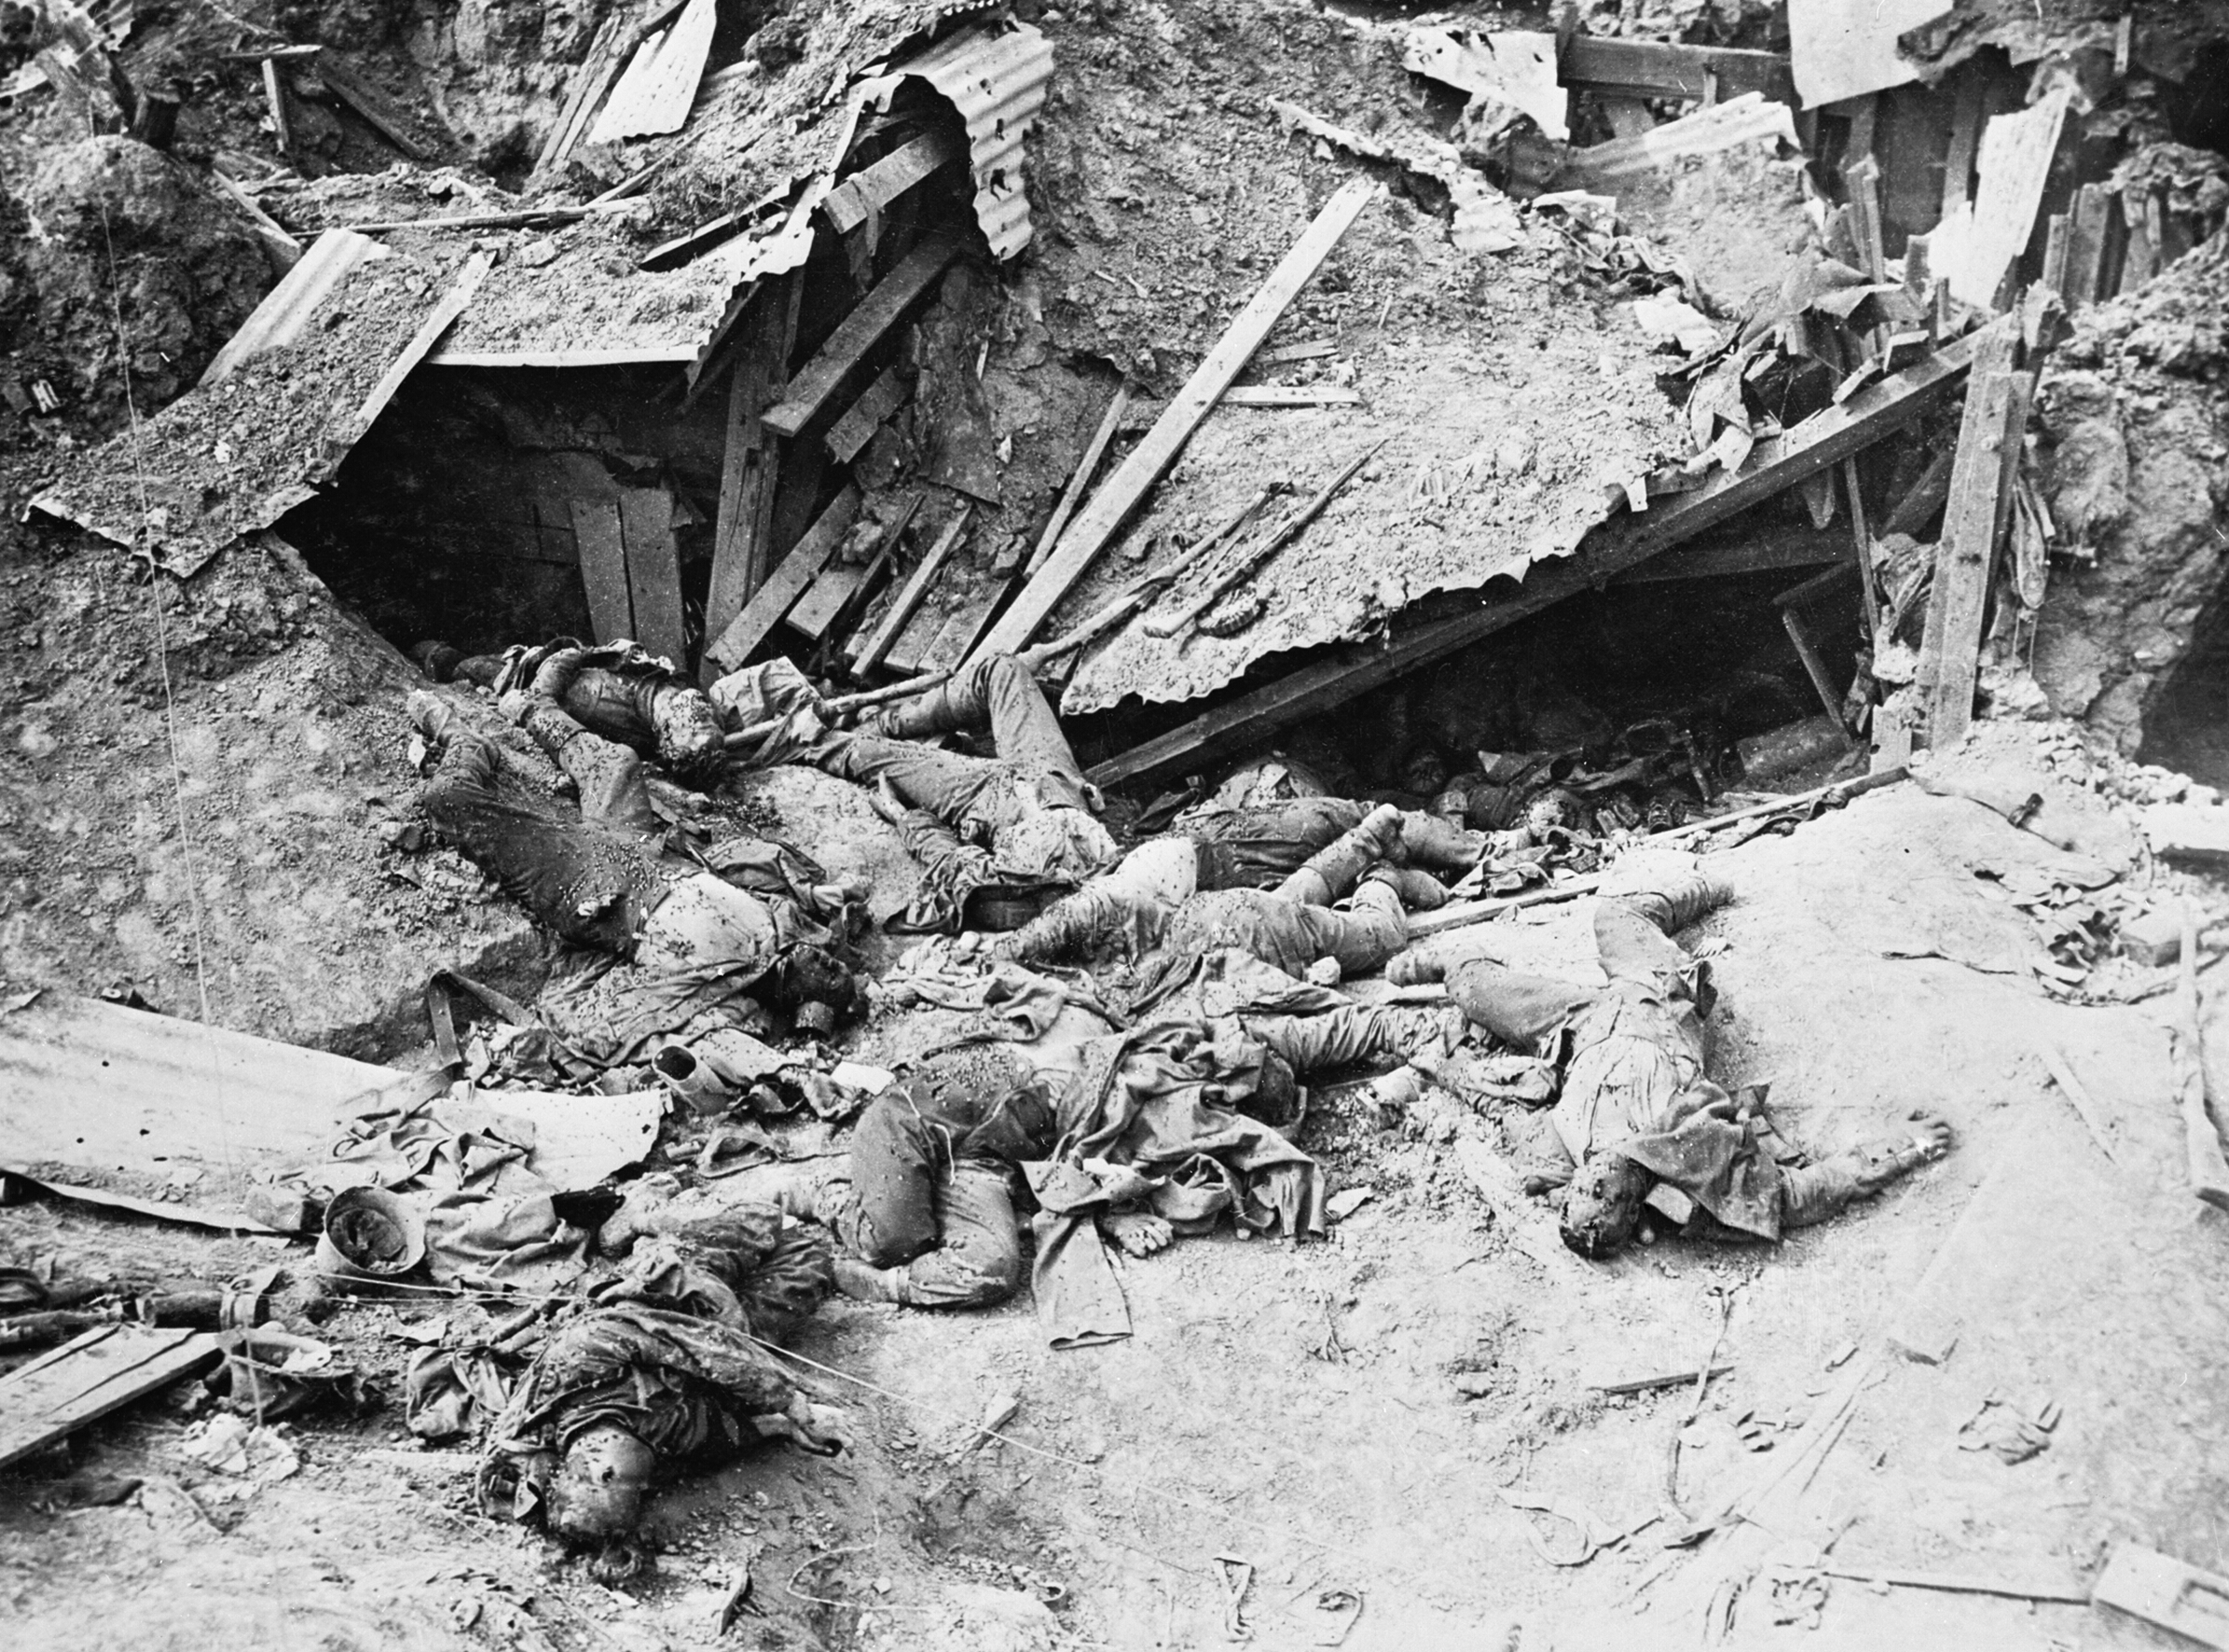 "The Battle of Guillemont. 3 -5 September 1916. Dead German soldiers scattered in the wreck of a machine gun post near Guillemont. The photograph shows the destruction which occurred when the defence had no deep shelter." Taken by John Warwick Brooke.